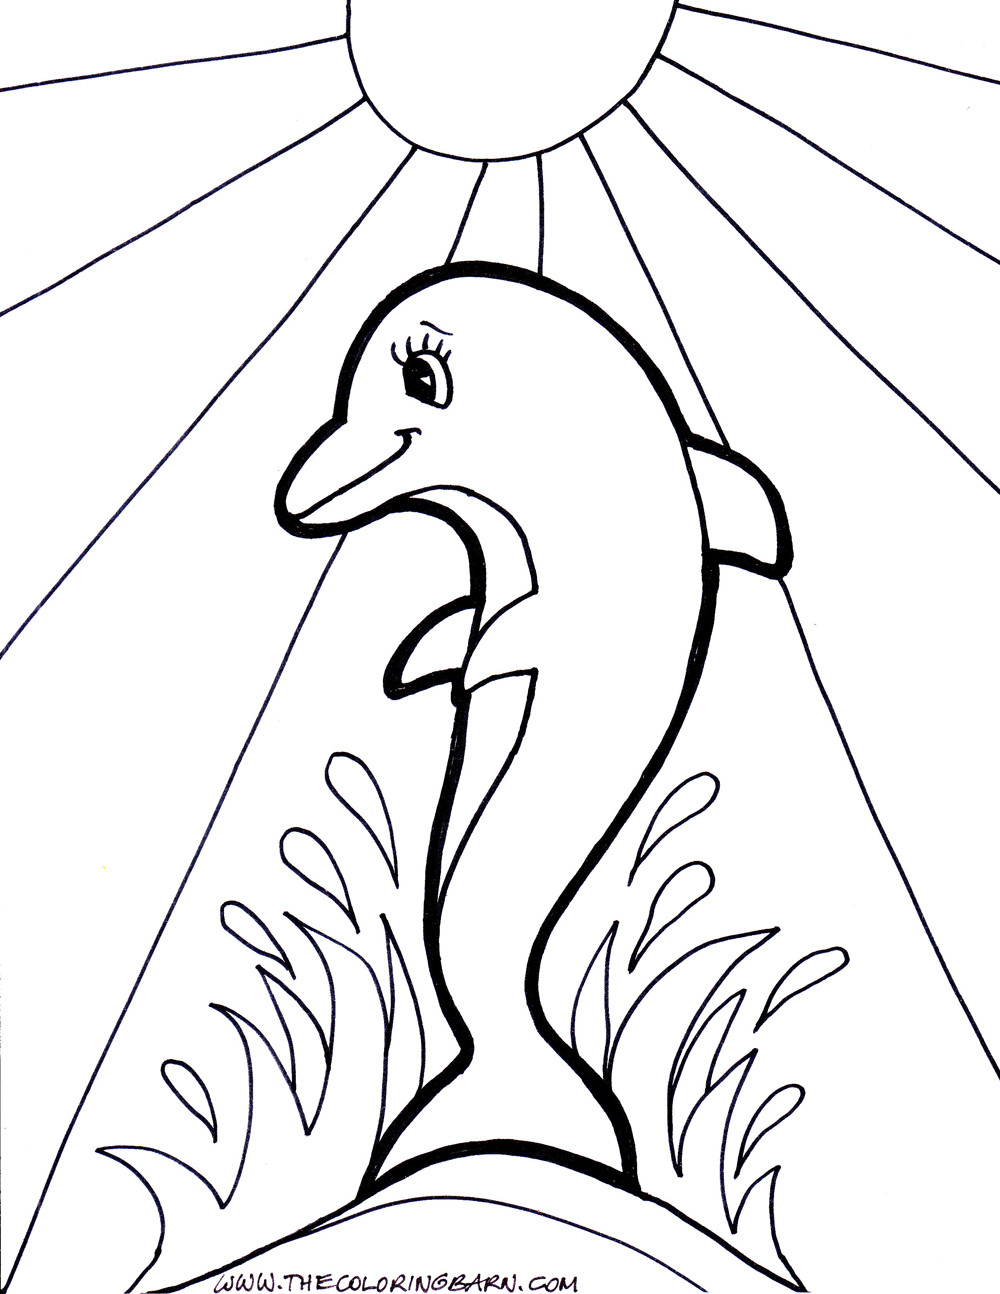 Baby Dolphin Coloring Pages
 Coloring Pages For Girls at GetDrawings